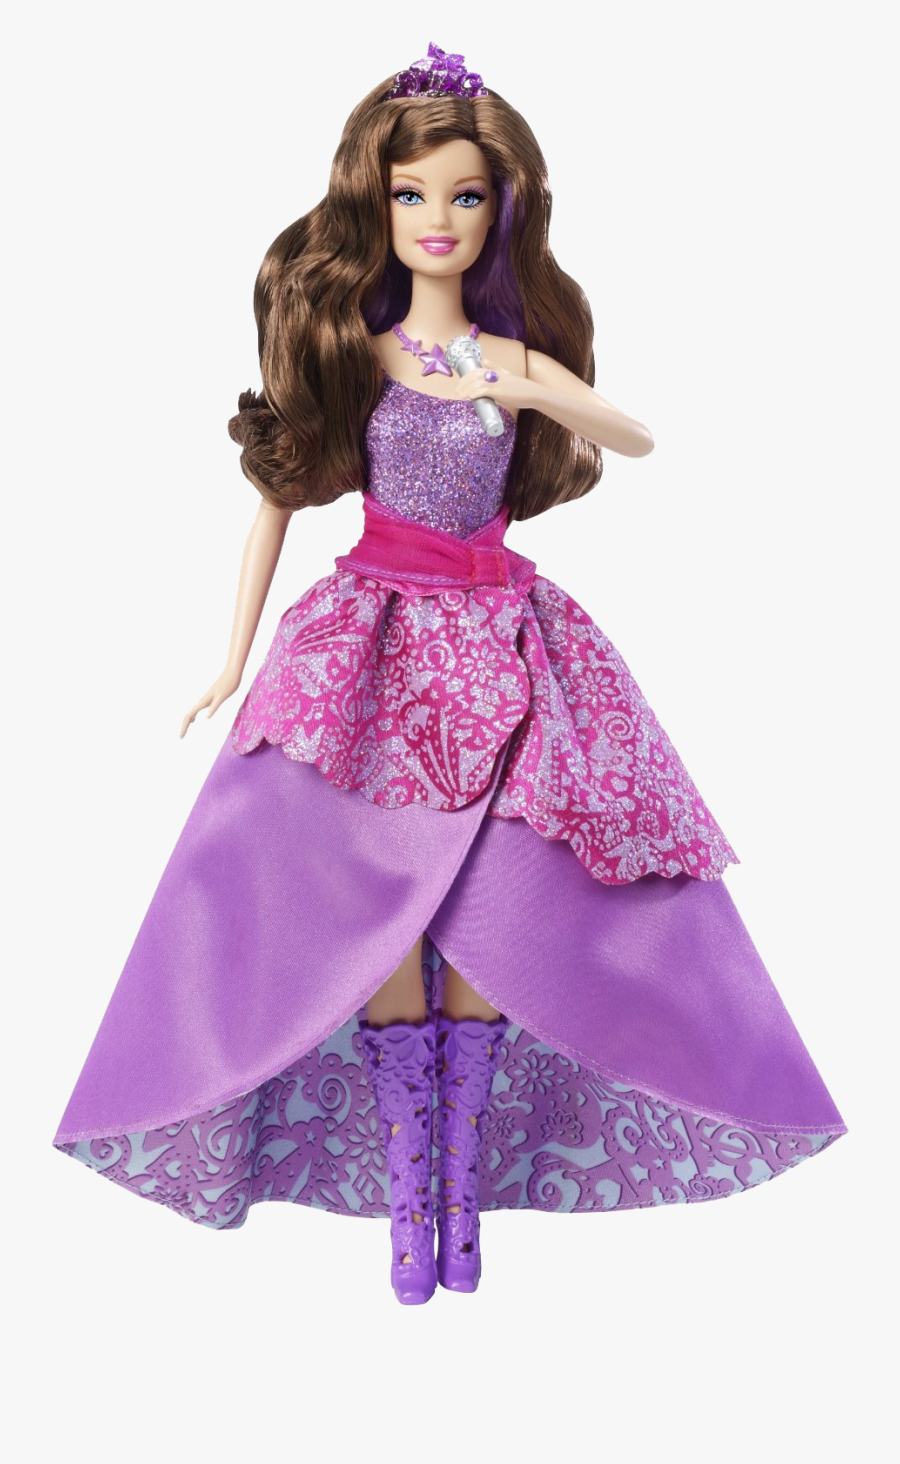 Doll Png Free Download - Barbie Princess And The Popstar Doll, Transparent Clipart